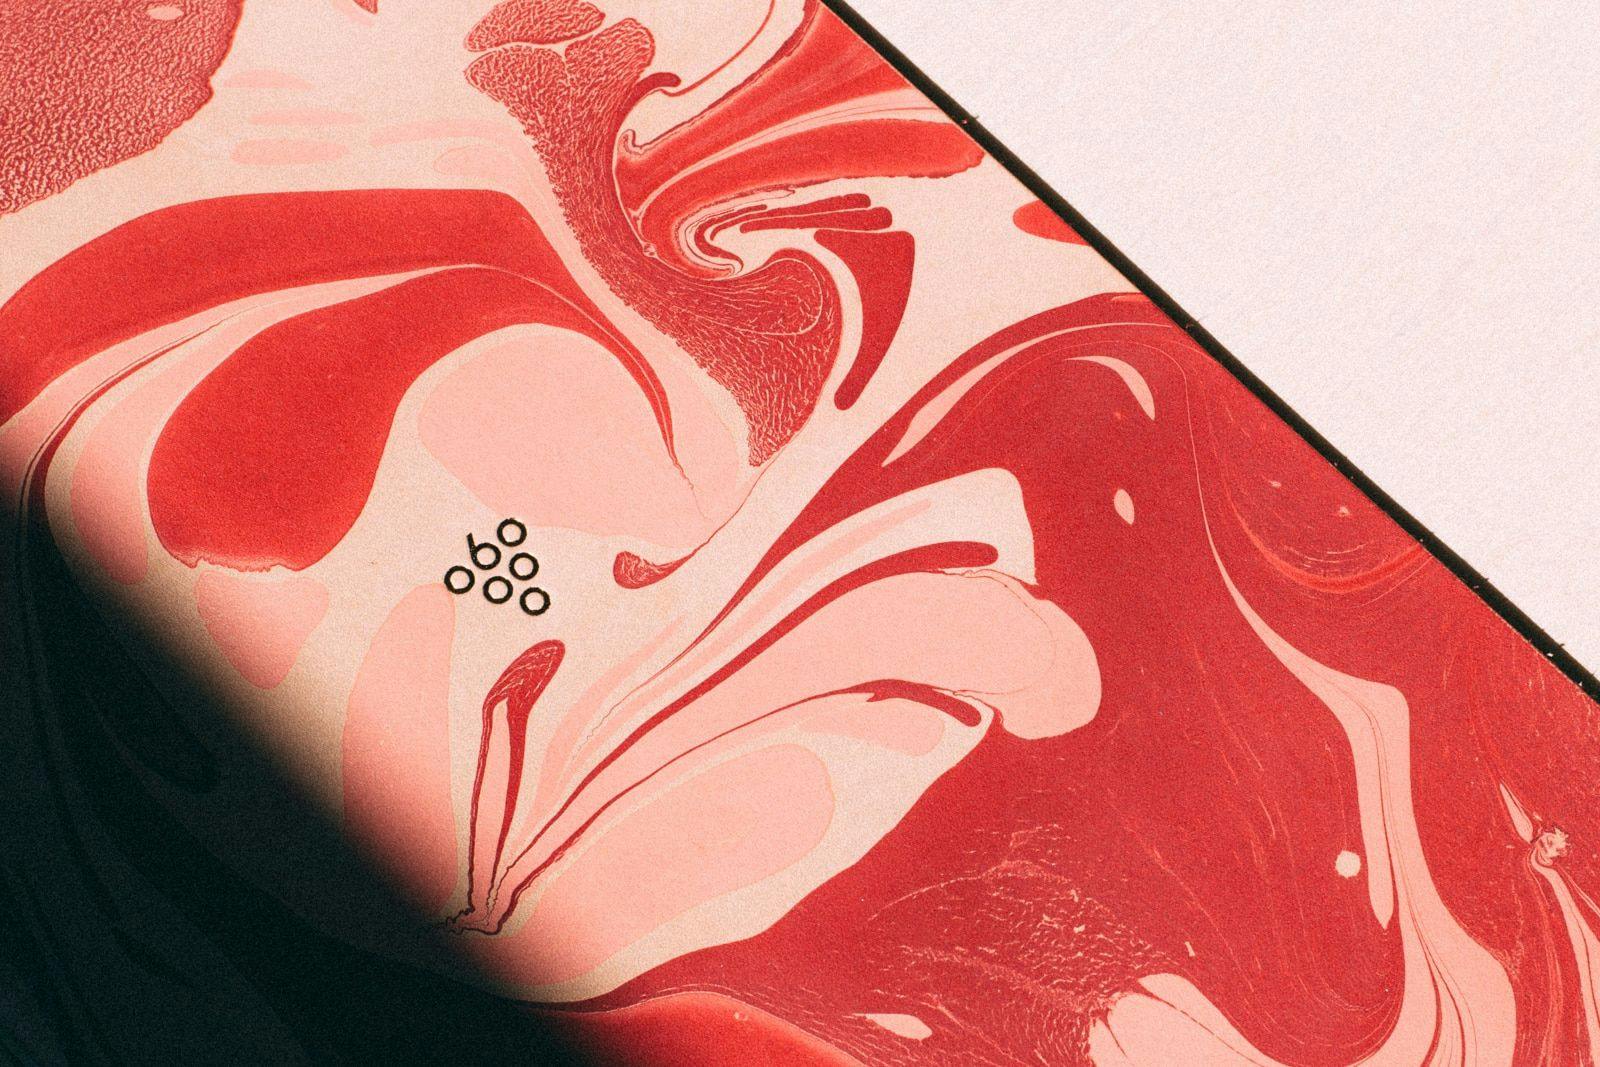 A close up of the Sixty Vines logo on a red marble background